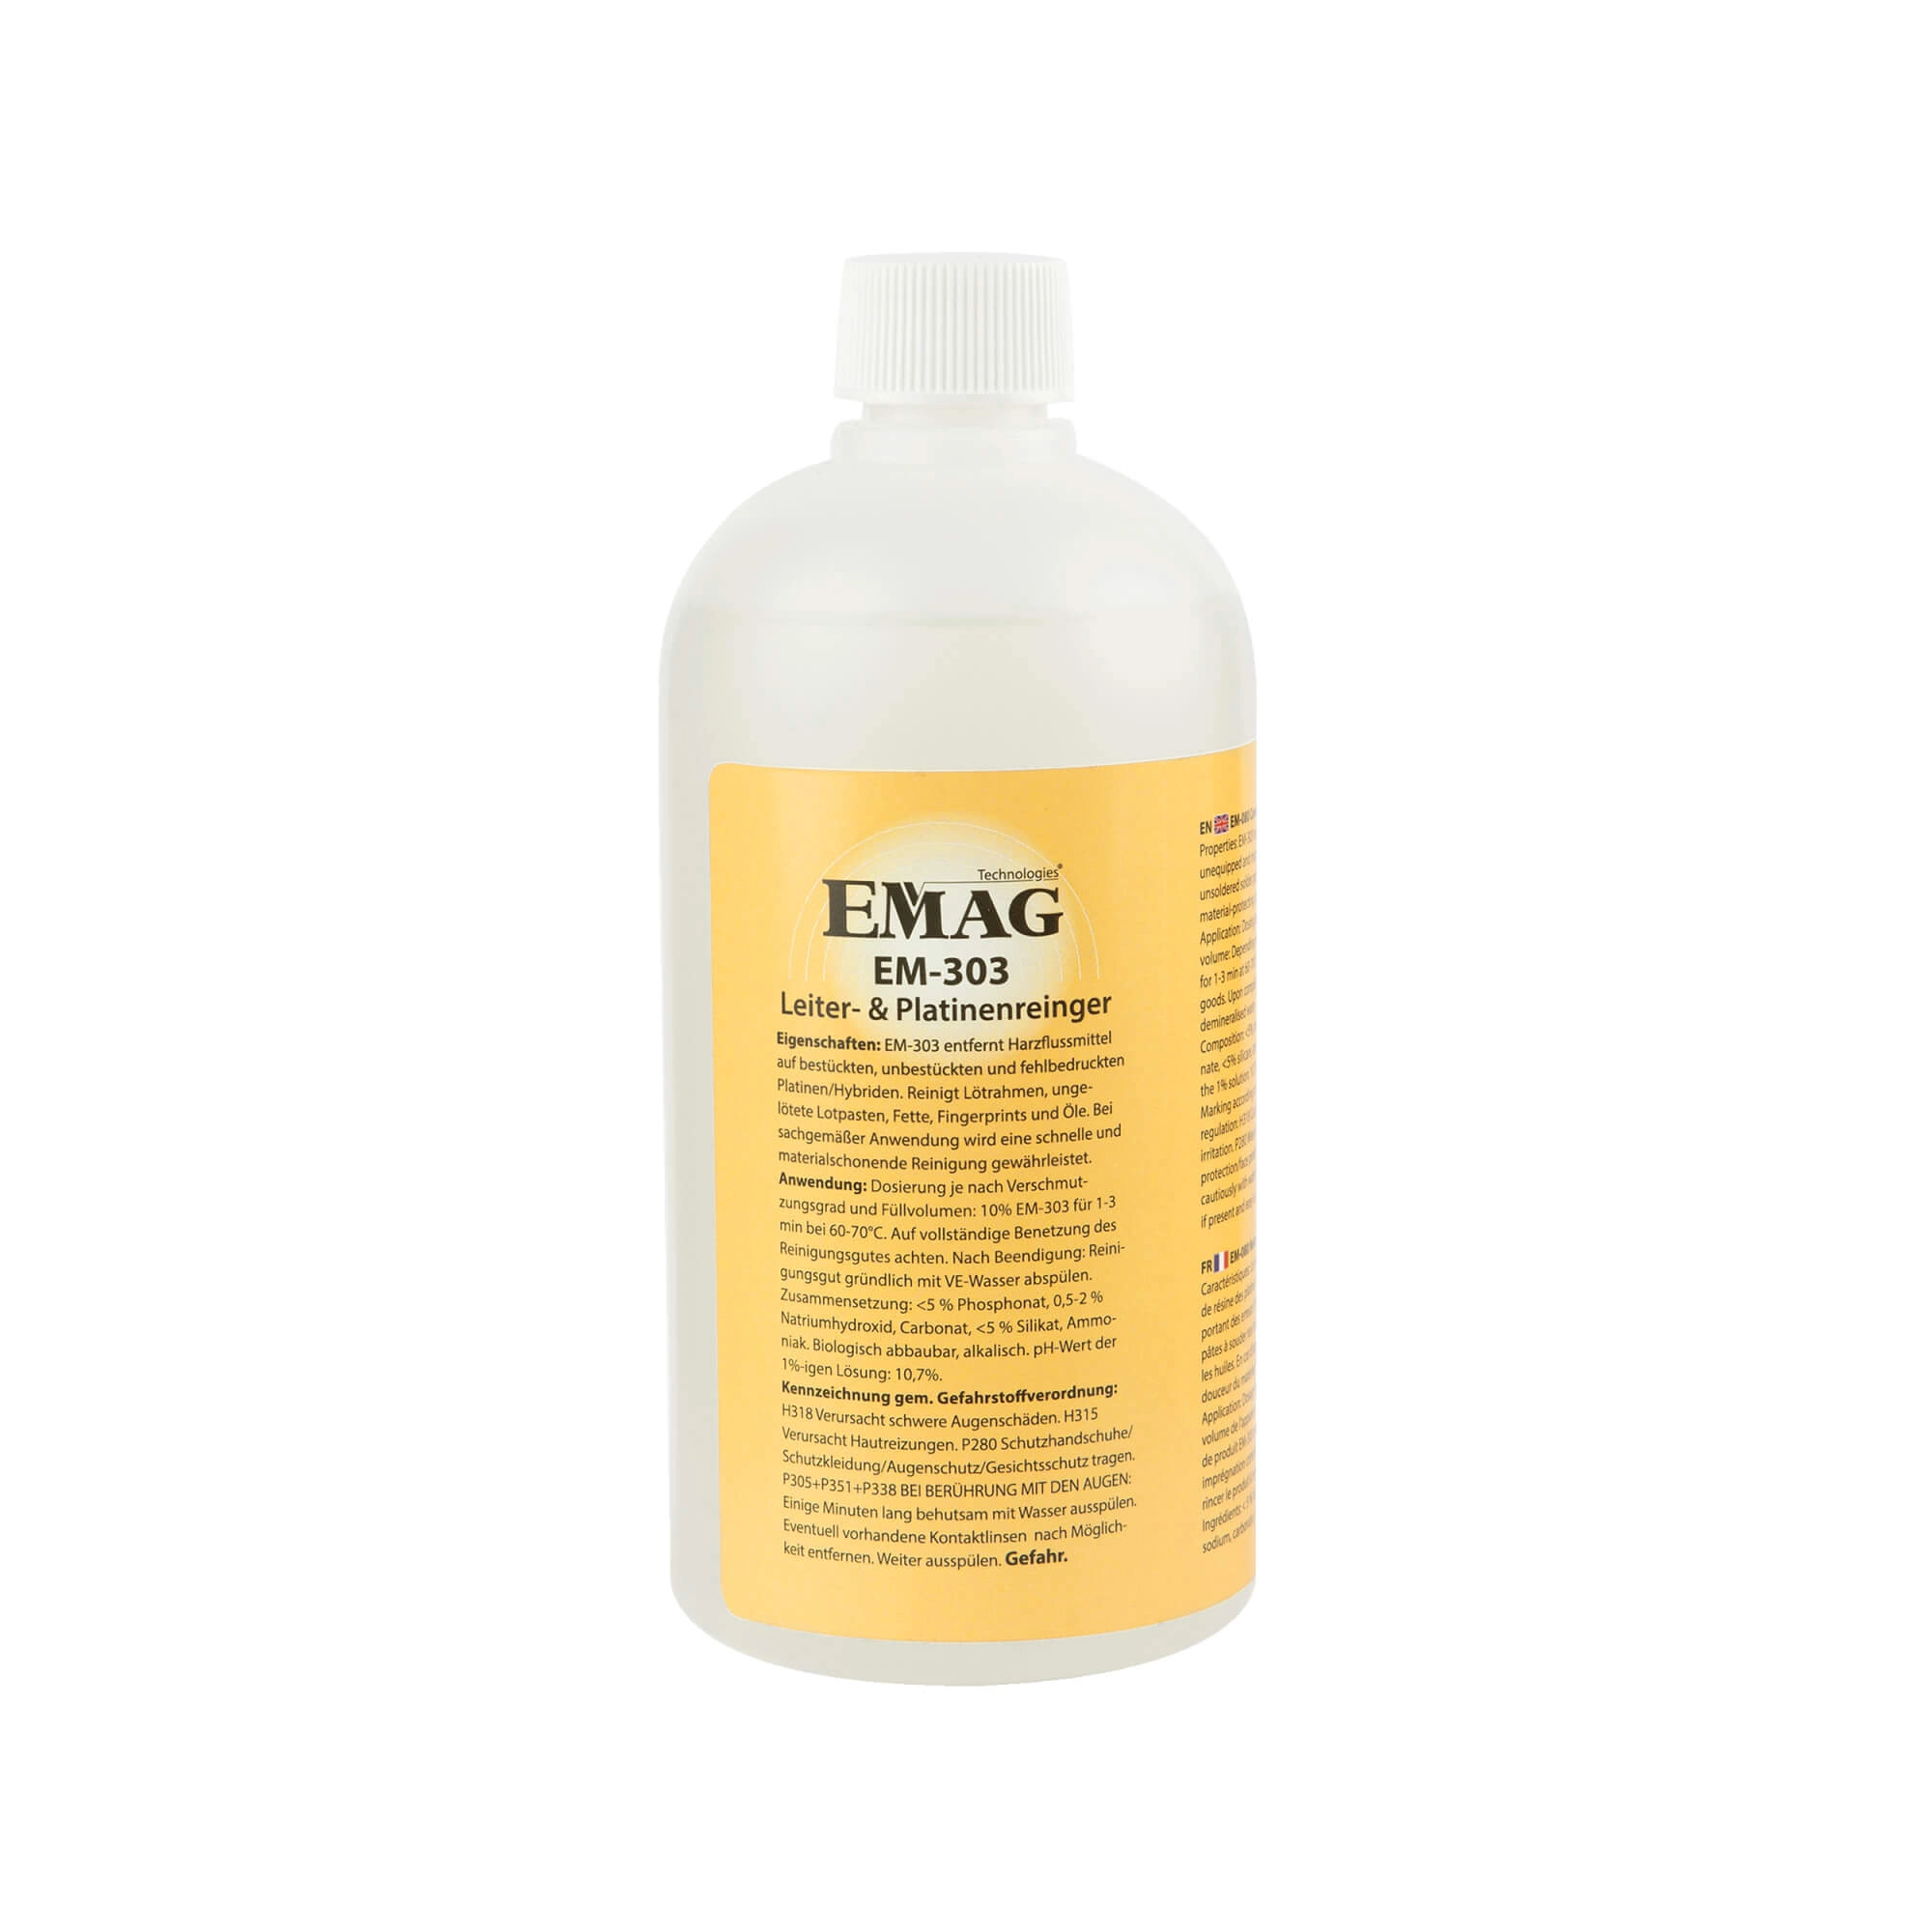 EM-303 Conductor and circuit board cleaner